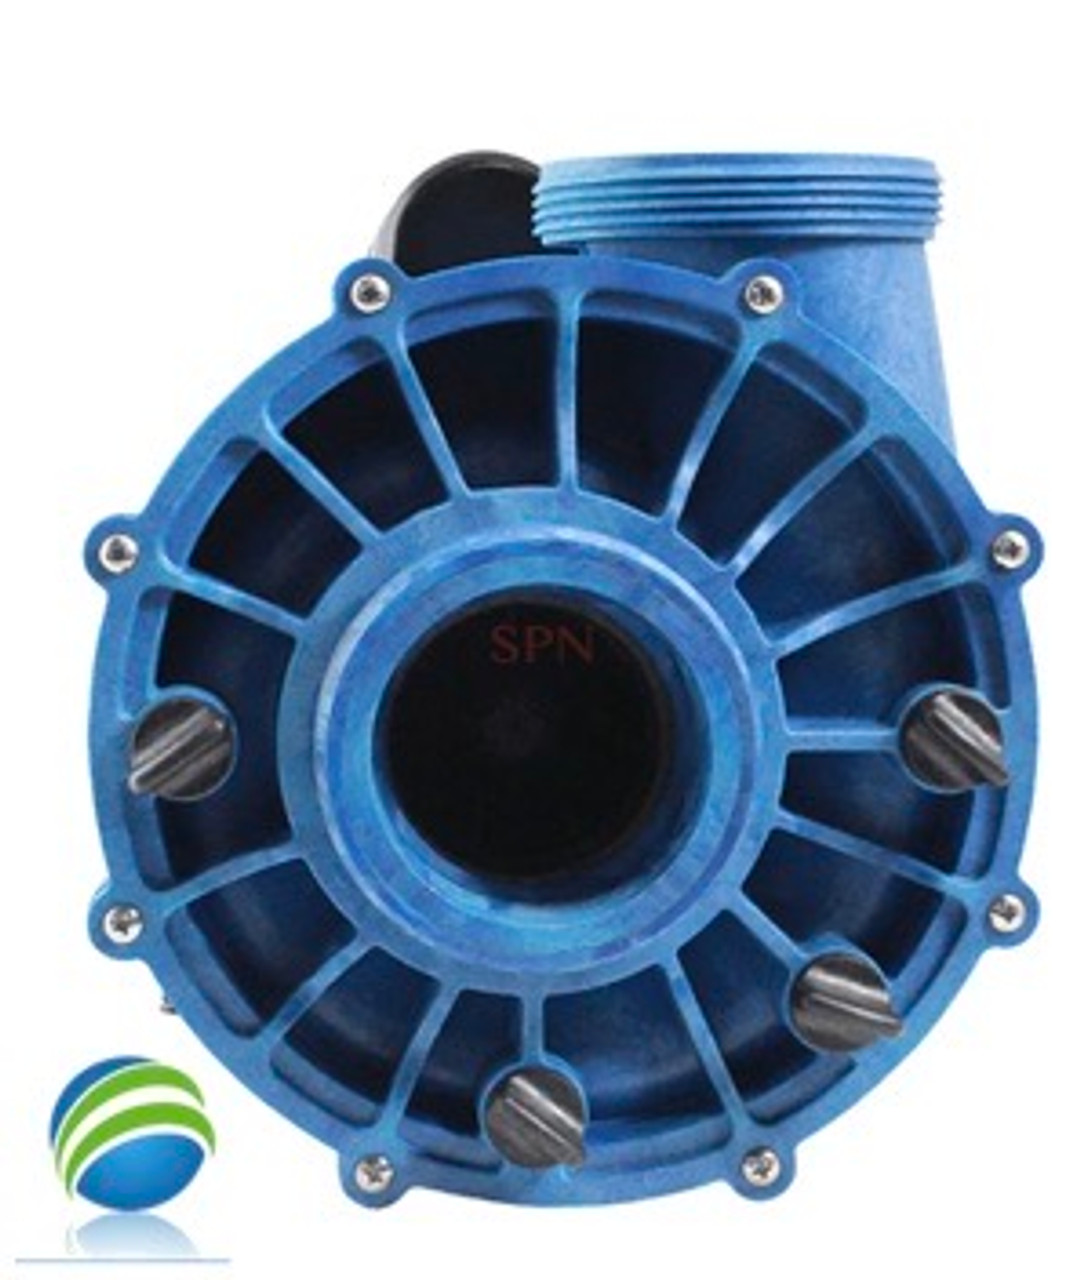 Complete Pump, Aqua-Flo, XP3, 4.0HP, 15.0/4.5A, 230v, 56fr, 2 1/2"X 2 1/2" 1 or 2 Speed
The suction side and pressure side measure about 3 5/8" edge to edge